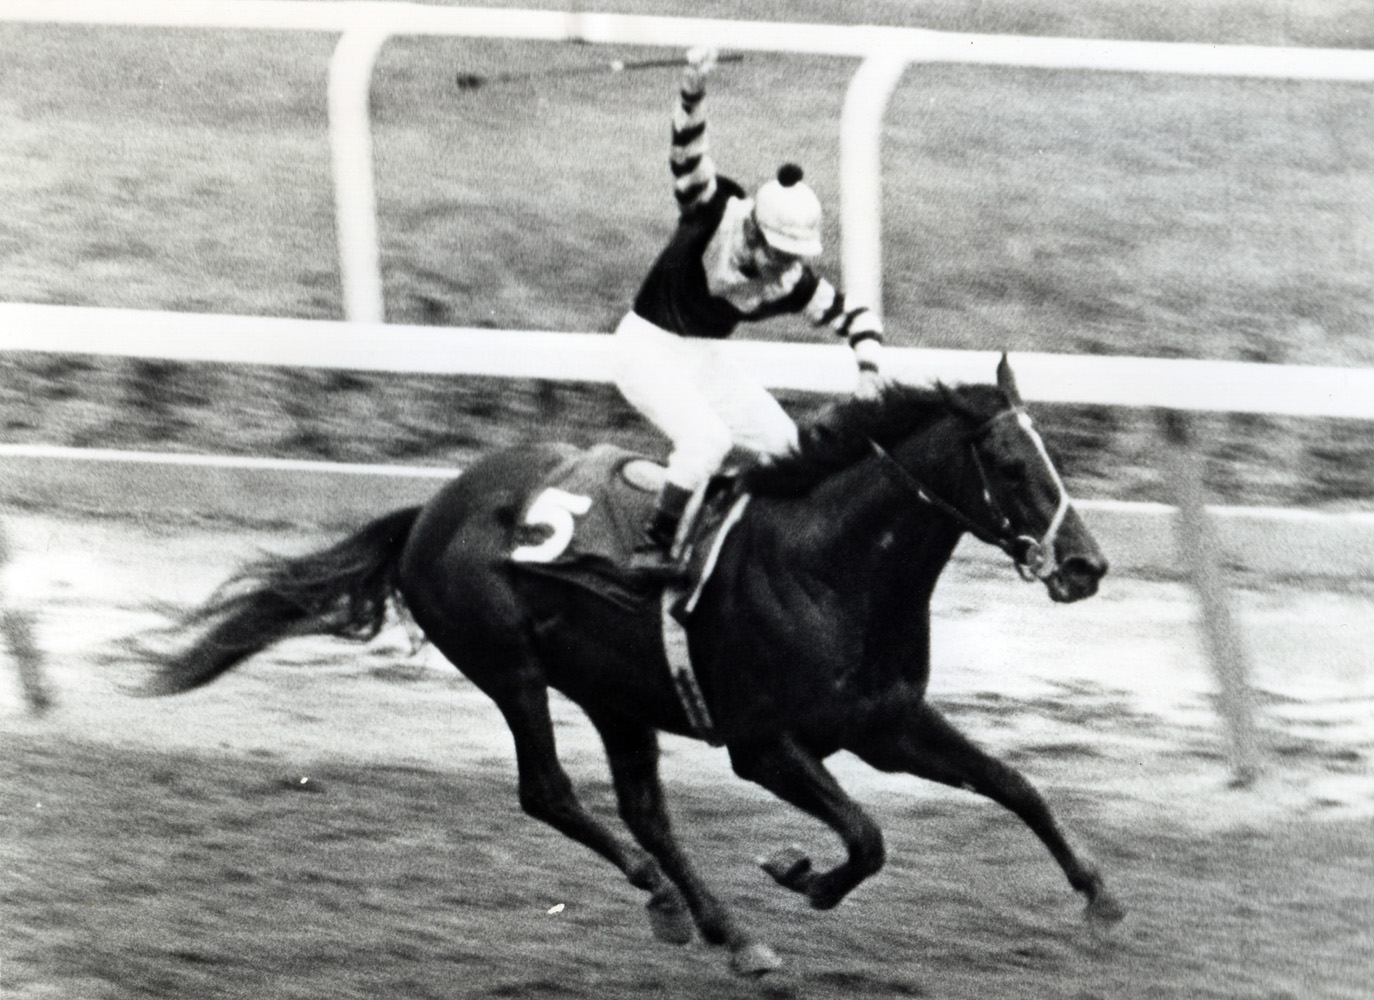 Seattle Slew (Jean Cruguet up) winning the 1977 Belmont Stakes and becoming America's 10th Triple Crown winner (NYRA/Museum Collection)